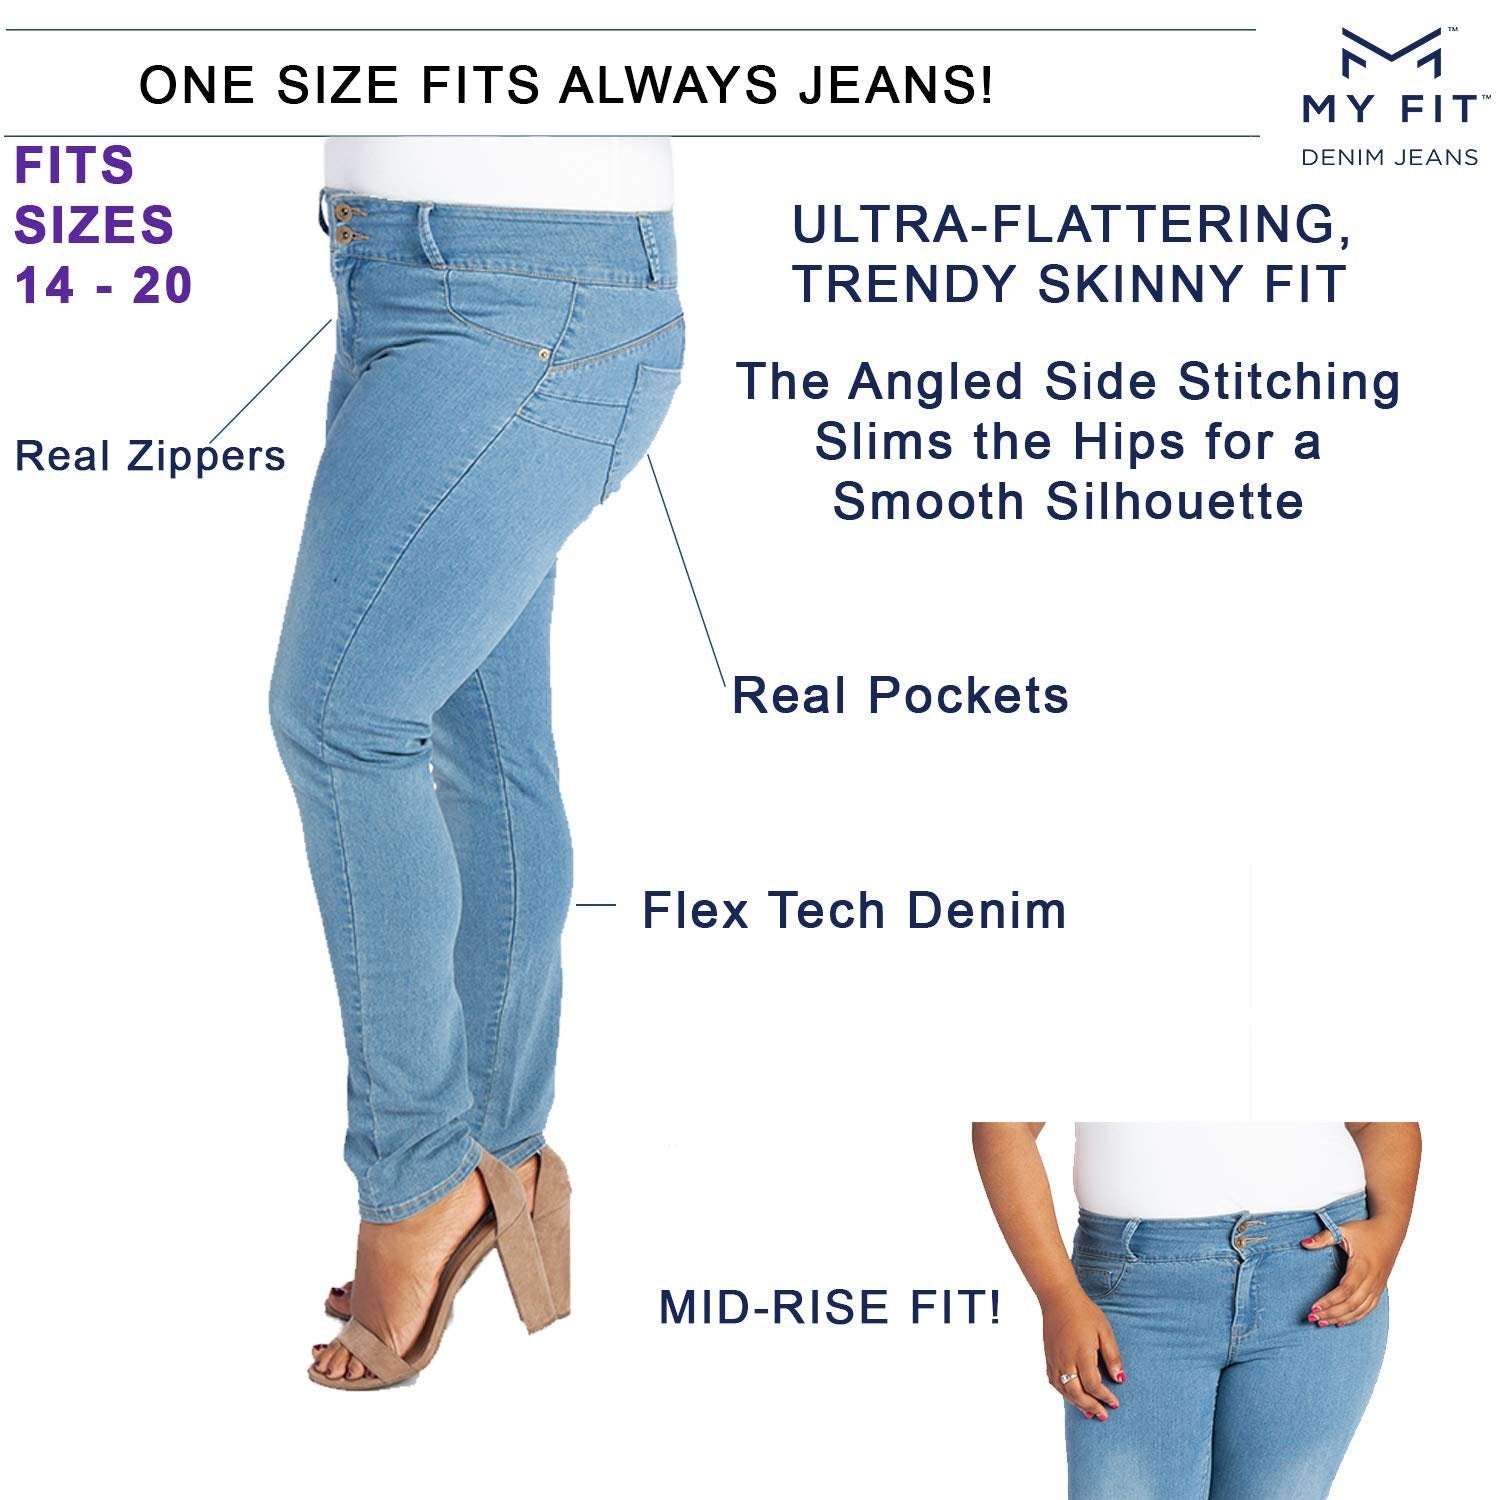 My Fit Jeans- SIZE 14-20 LIGHT WASH: Women's Stretch Denim Jeans with Pockets and the Comfort of Leggings, Petite through Plus Size